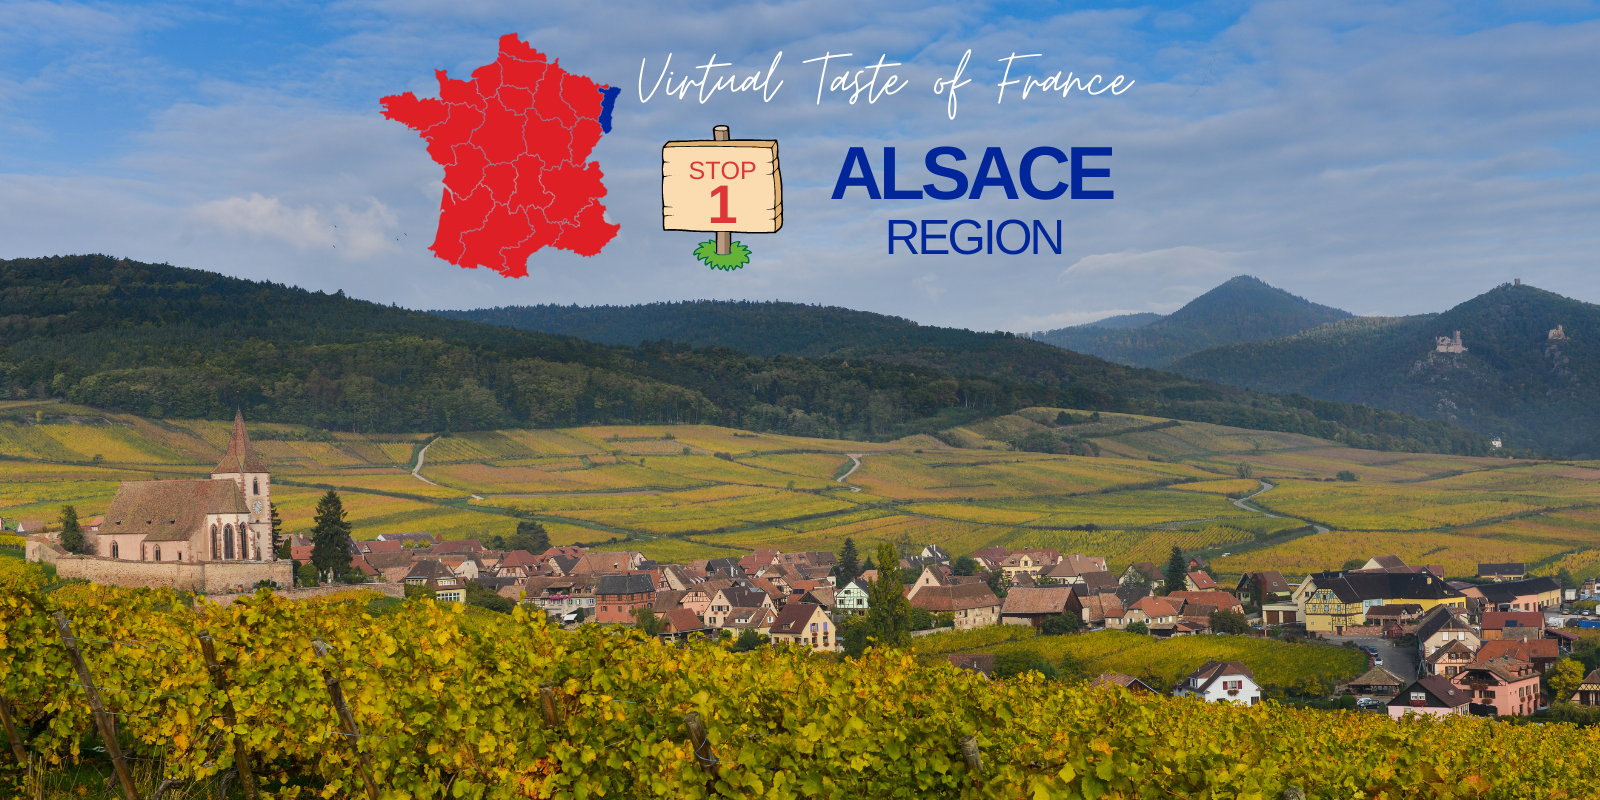 The French Market Virtual Taste of France - Stop 1 - The Alsace Region